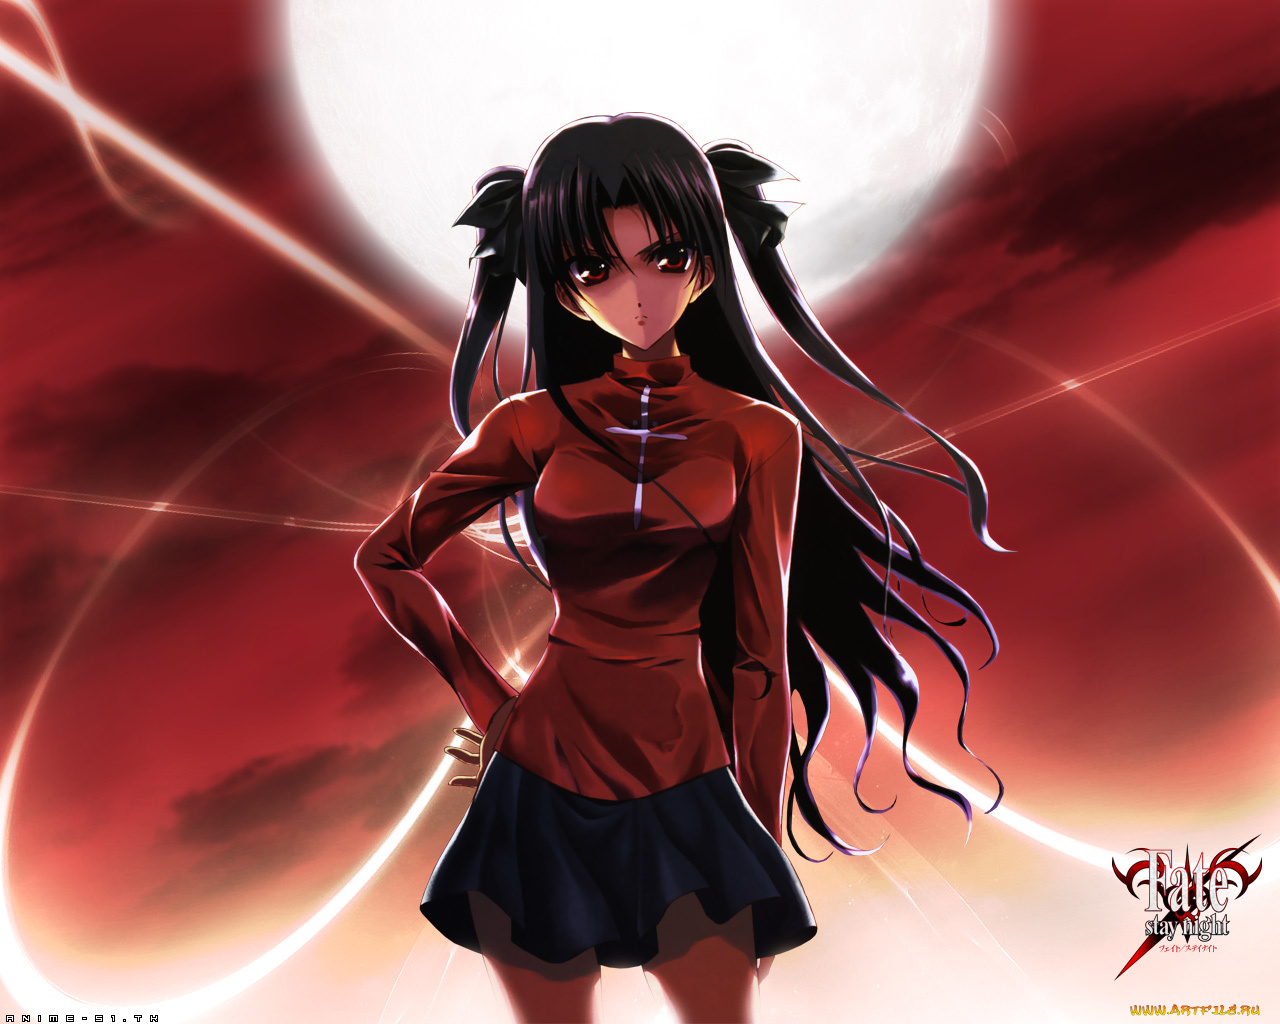 аниме, fate, stay, night